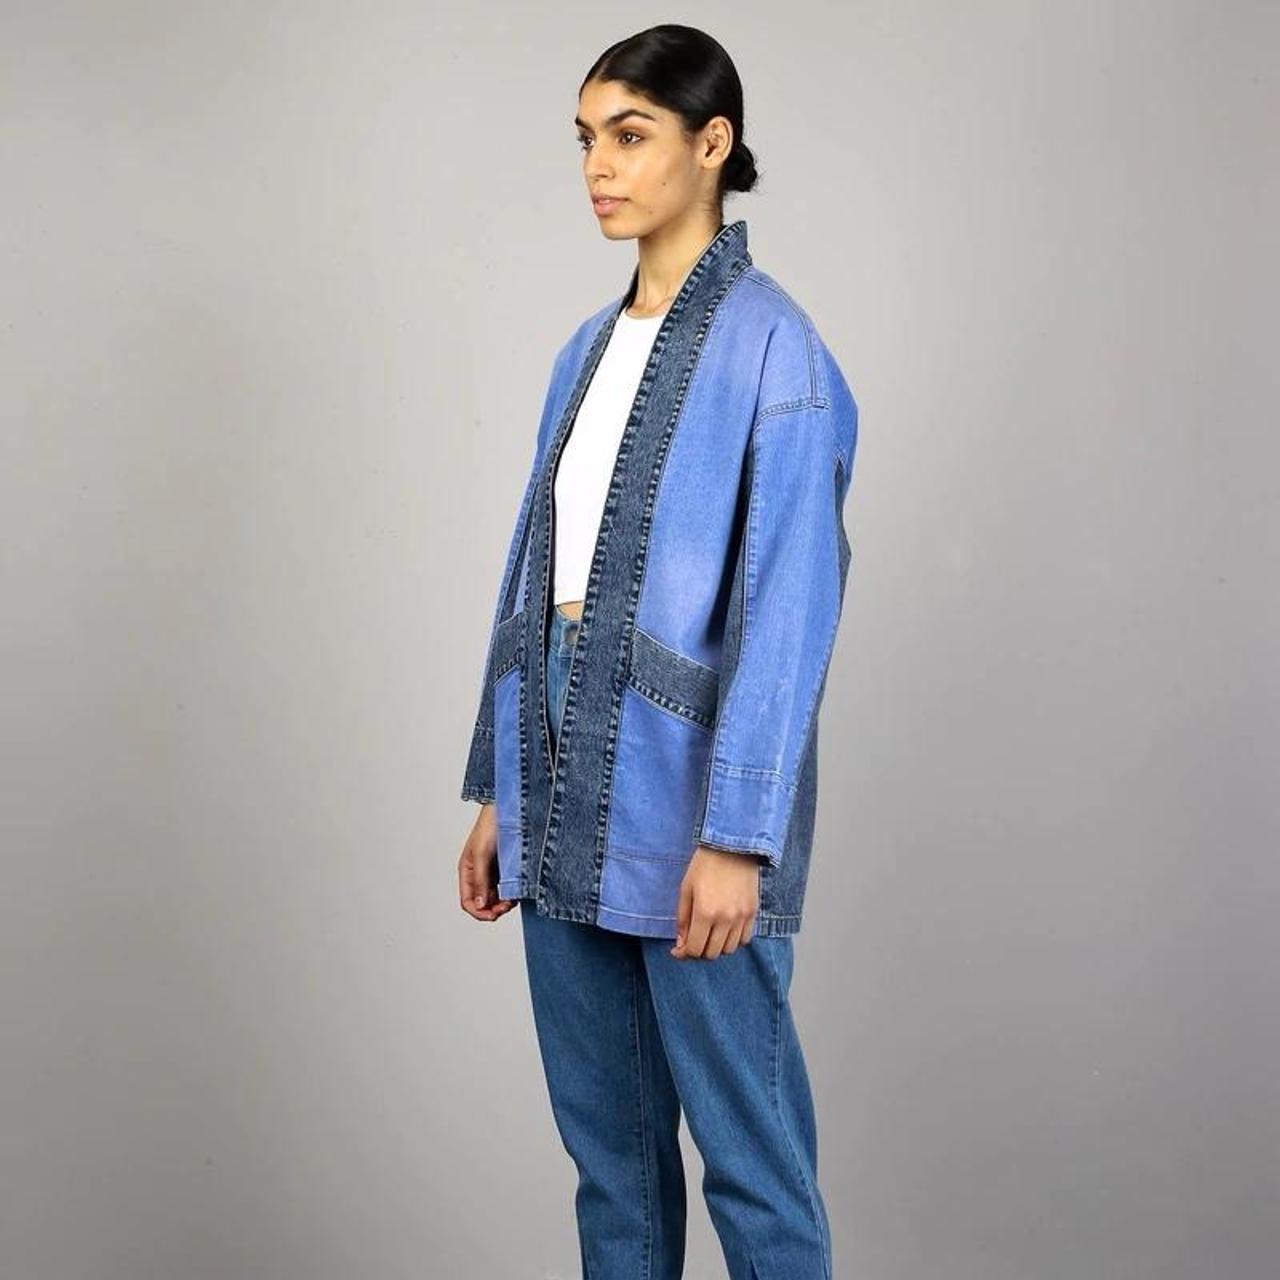 Native Youth Women's Blue and Navy Jacket